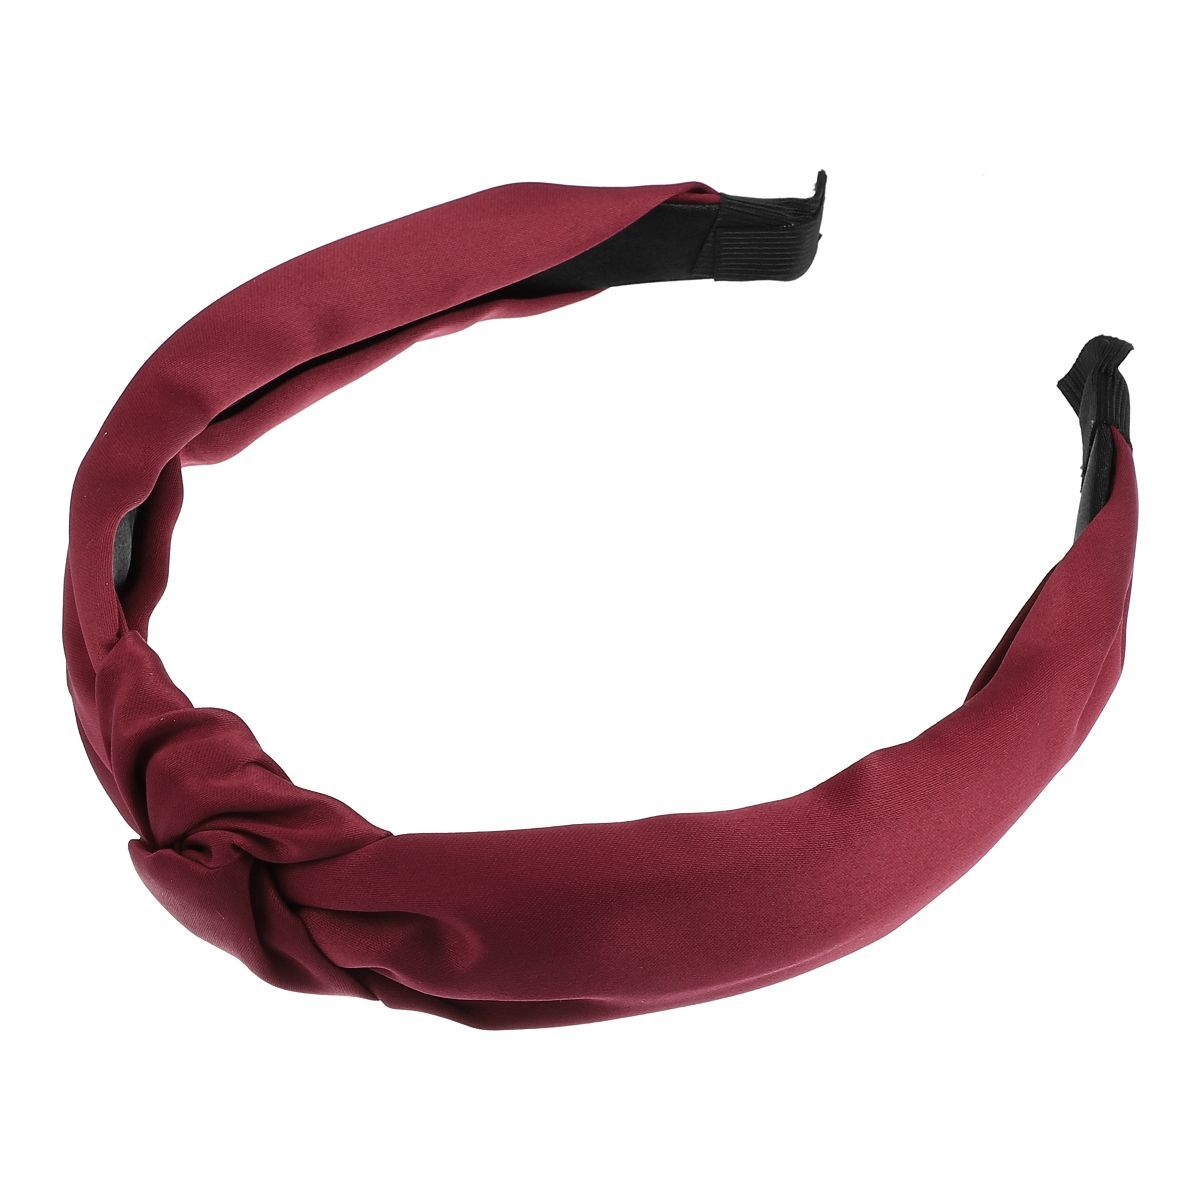 Unique Bargains Satin Knot Headband Hairband for Women 1.2 Inch Wide 1Pcs | Target